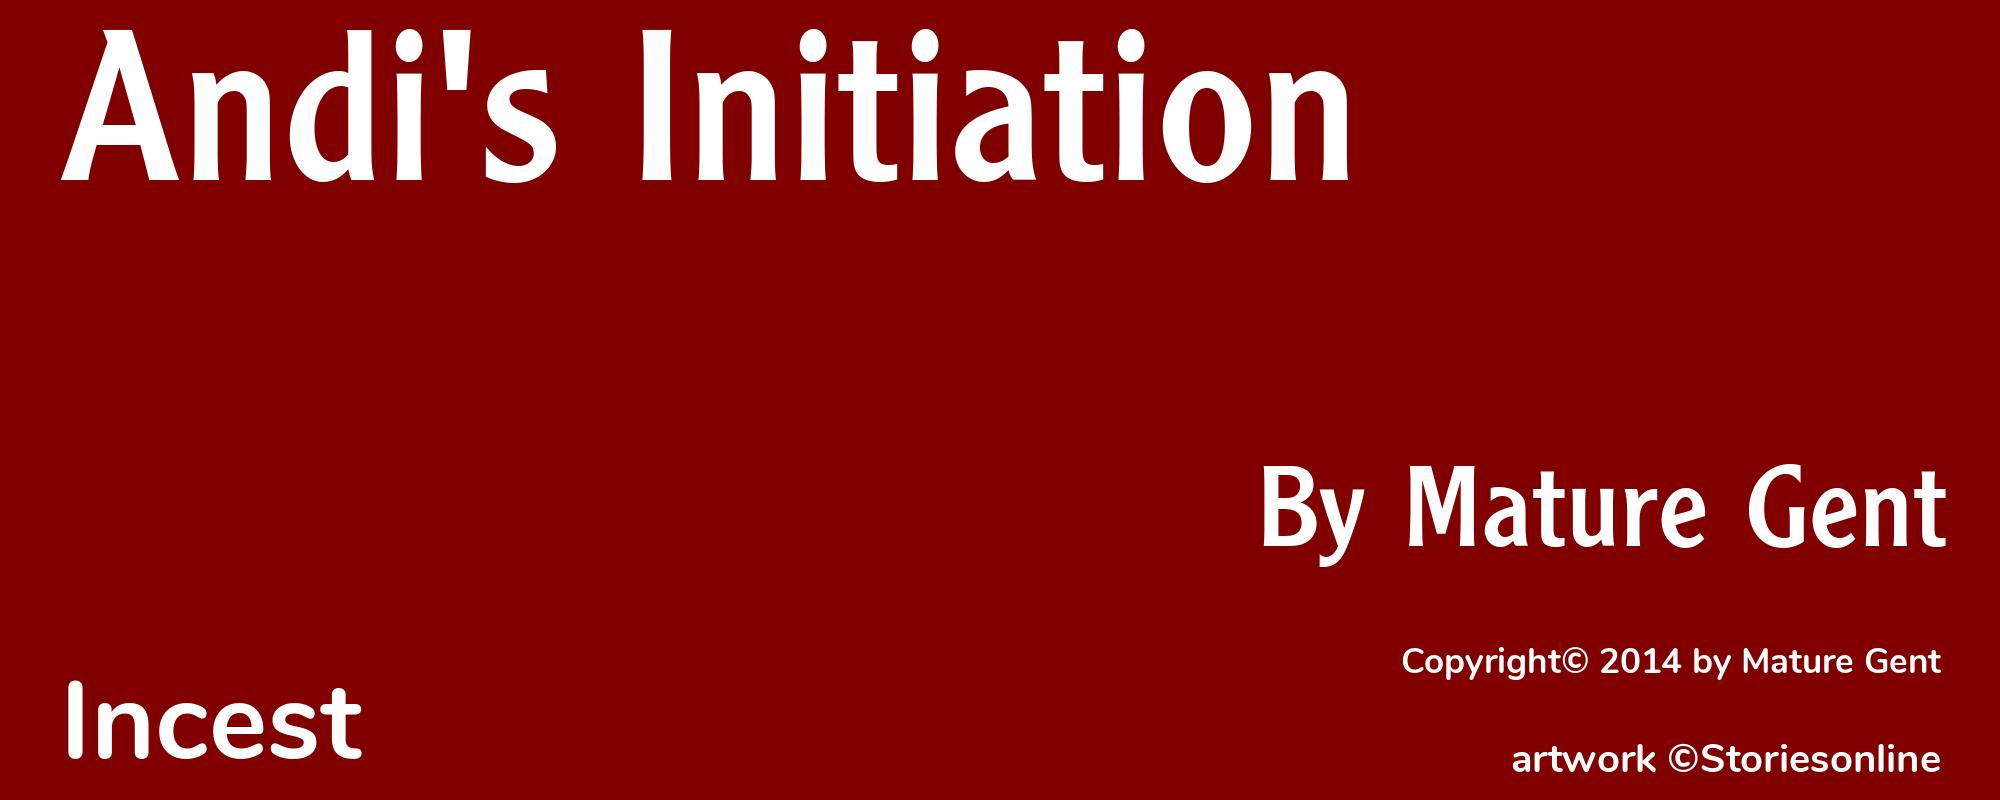 Andi's Initiation - Cover